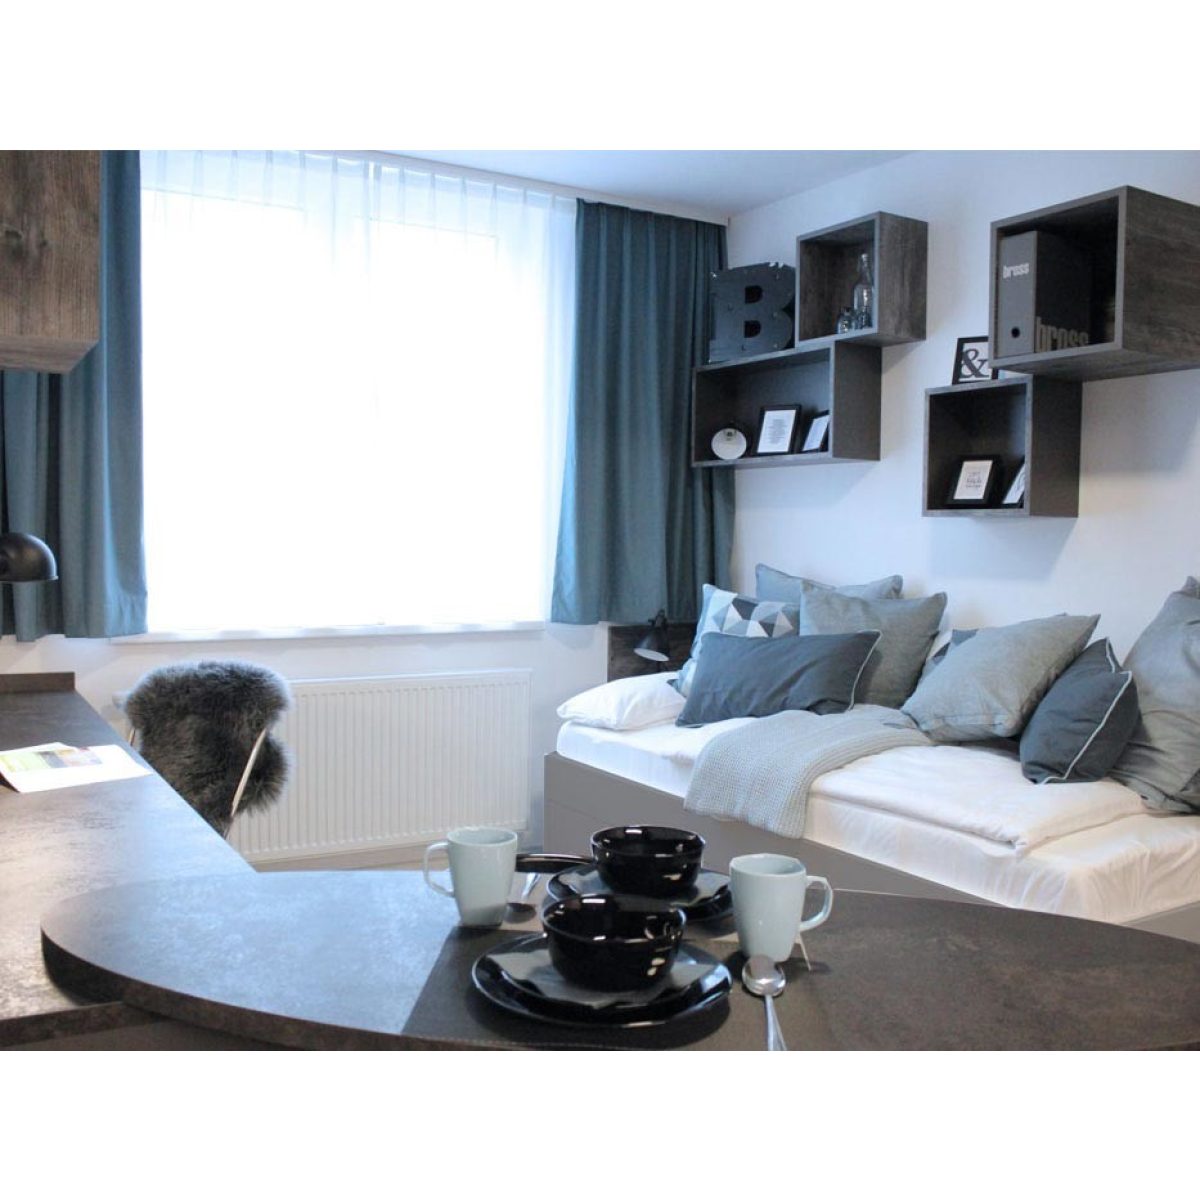 Stunning Single room apartment with Private bathroom and equipped Kitchen in BERLIN 2